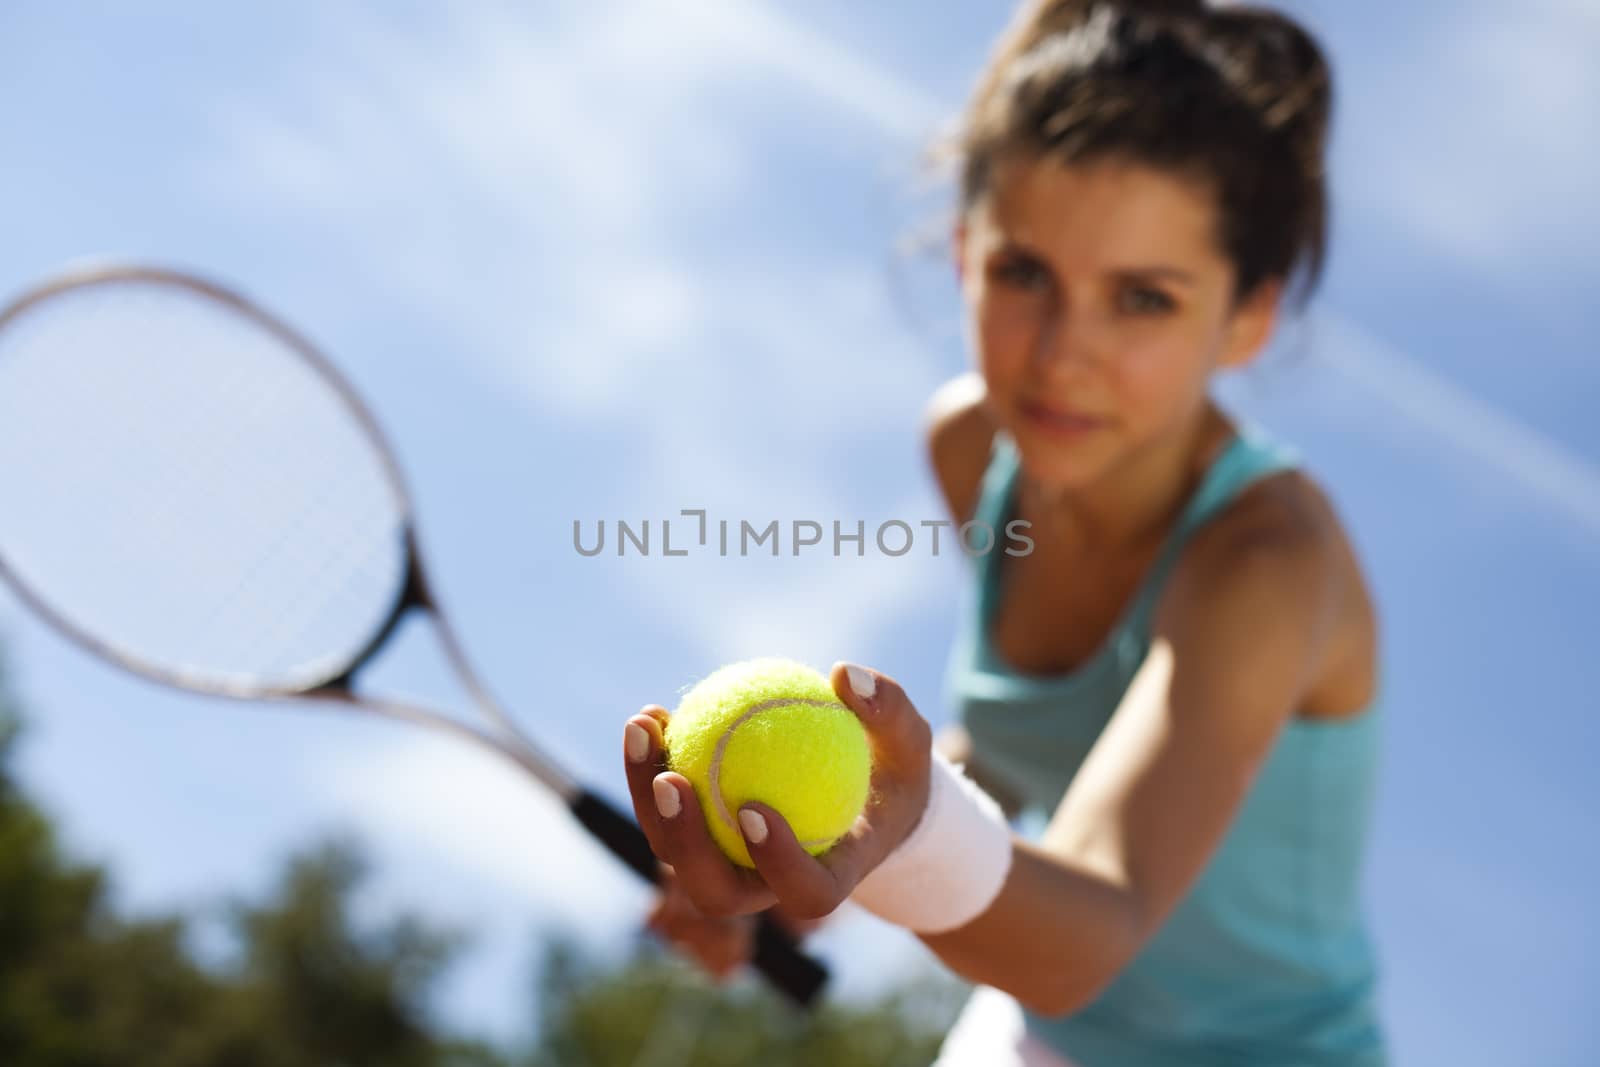 Woman playing tennis in summer by JanPietruszka